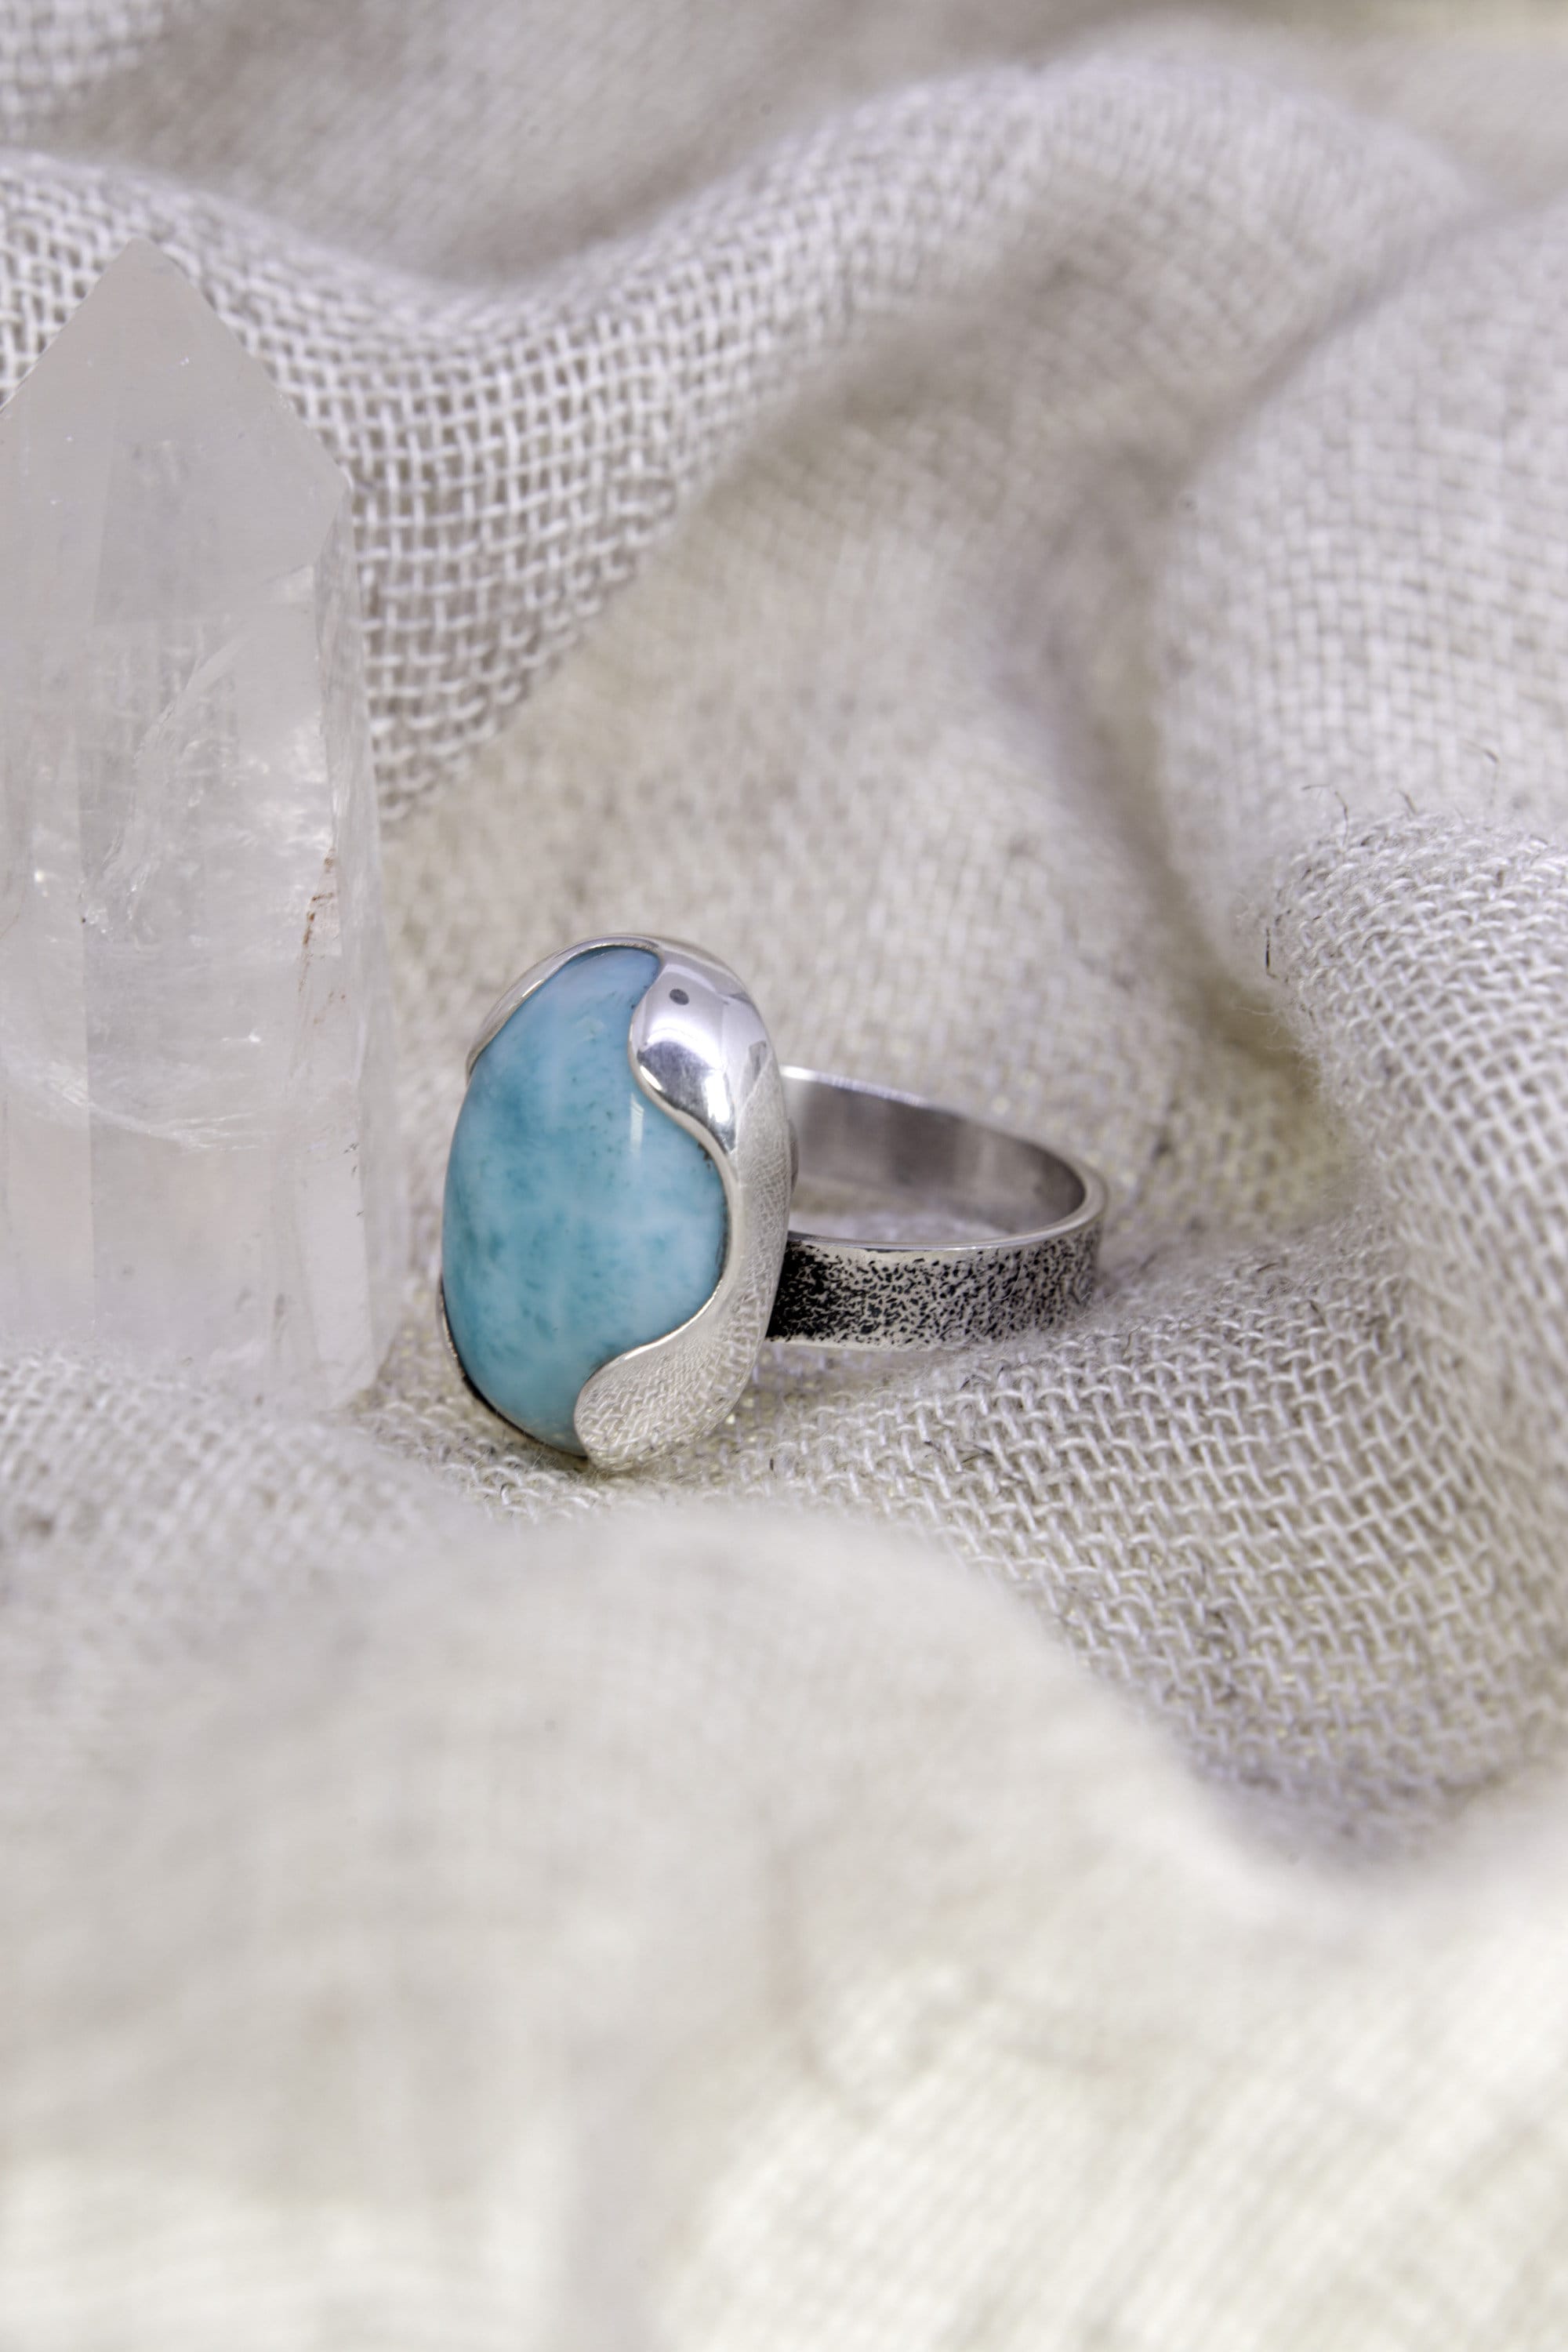 A Tribute to Oceanic Splendor: Adjustable Sterling Silver Ring with Oval Larimar - Unisex - Size 5-12 US - NO/06